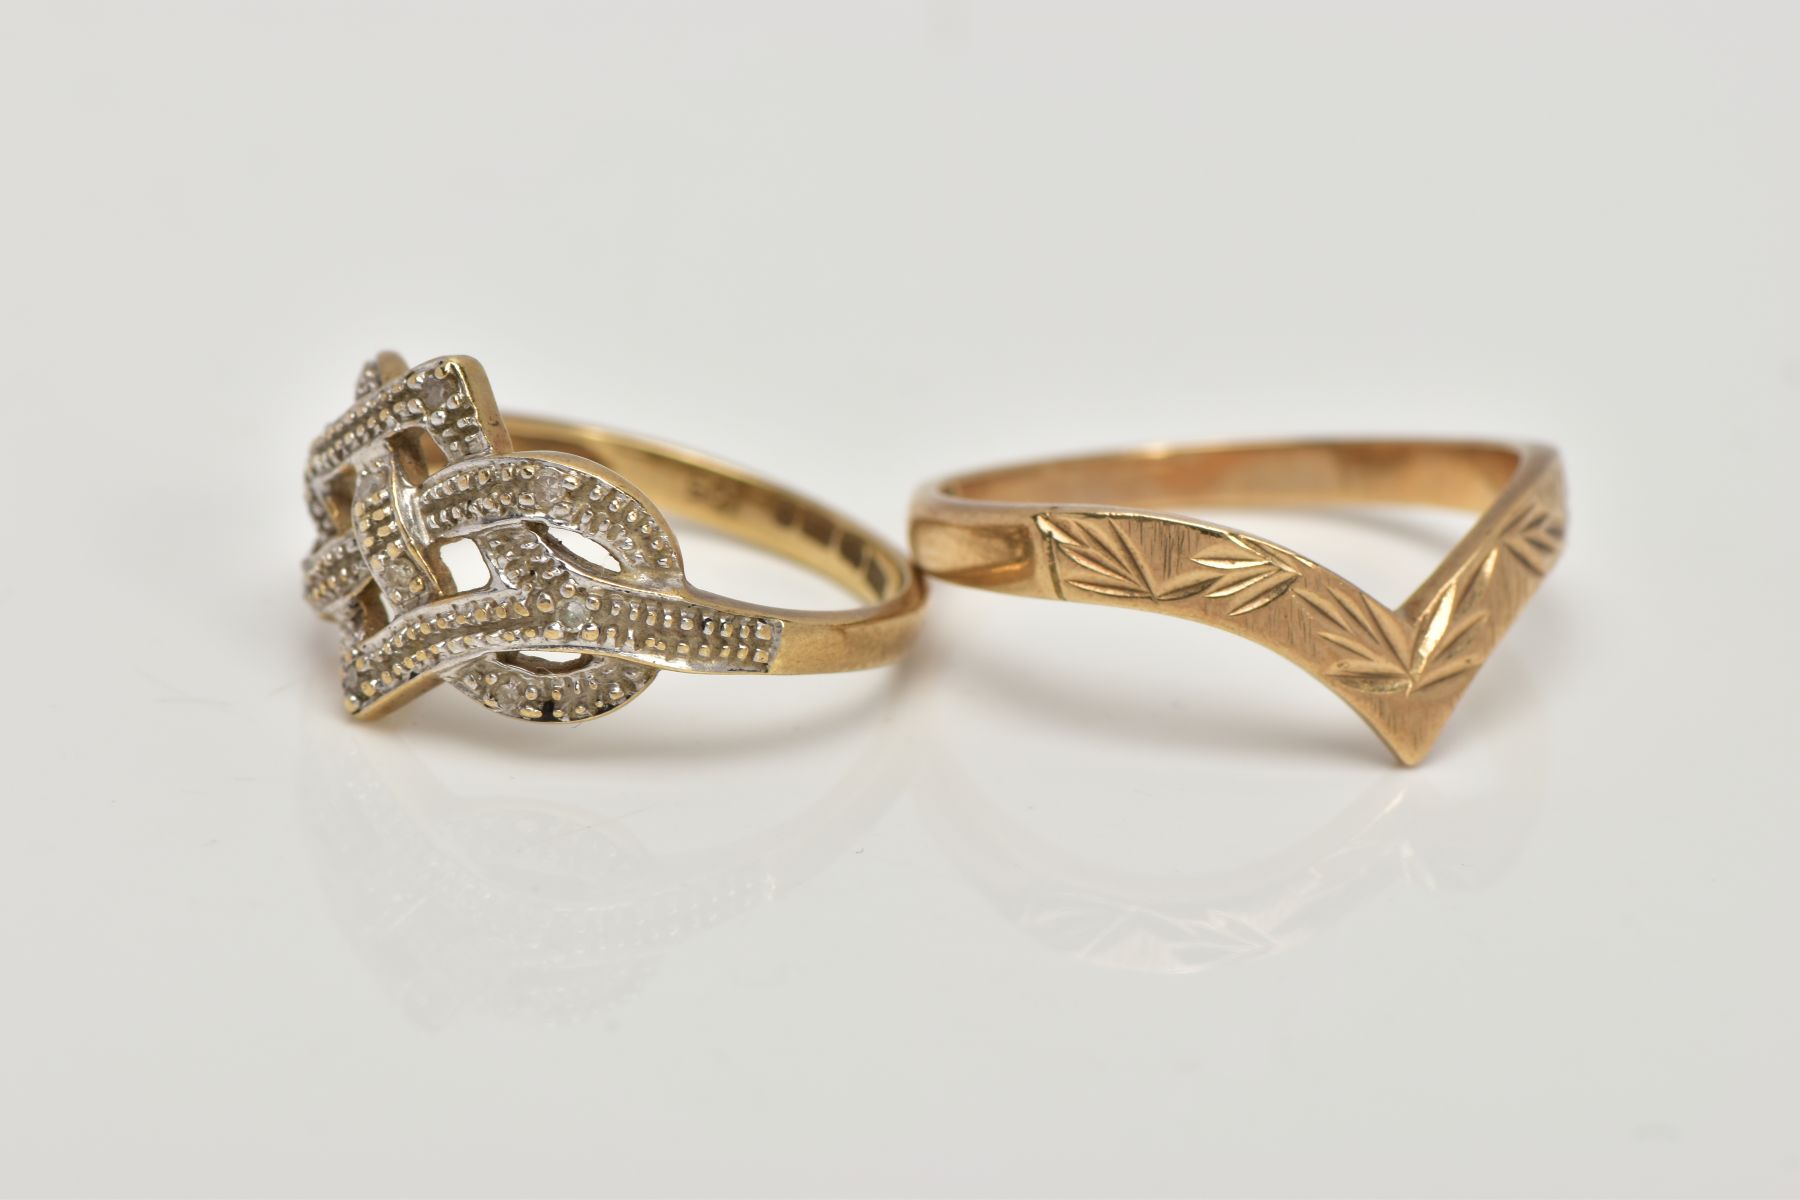 A 9CT GOLD DIAMOND RING AND A WISHBONE RING, the openwork ring set with single cut diamond detail, - Image 2 of 3